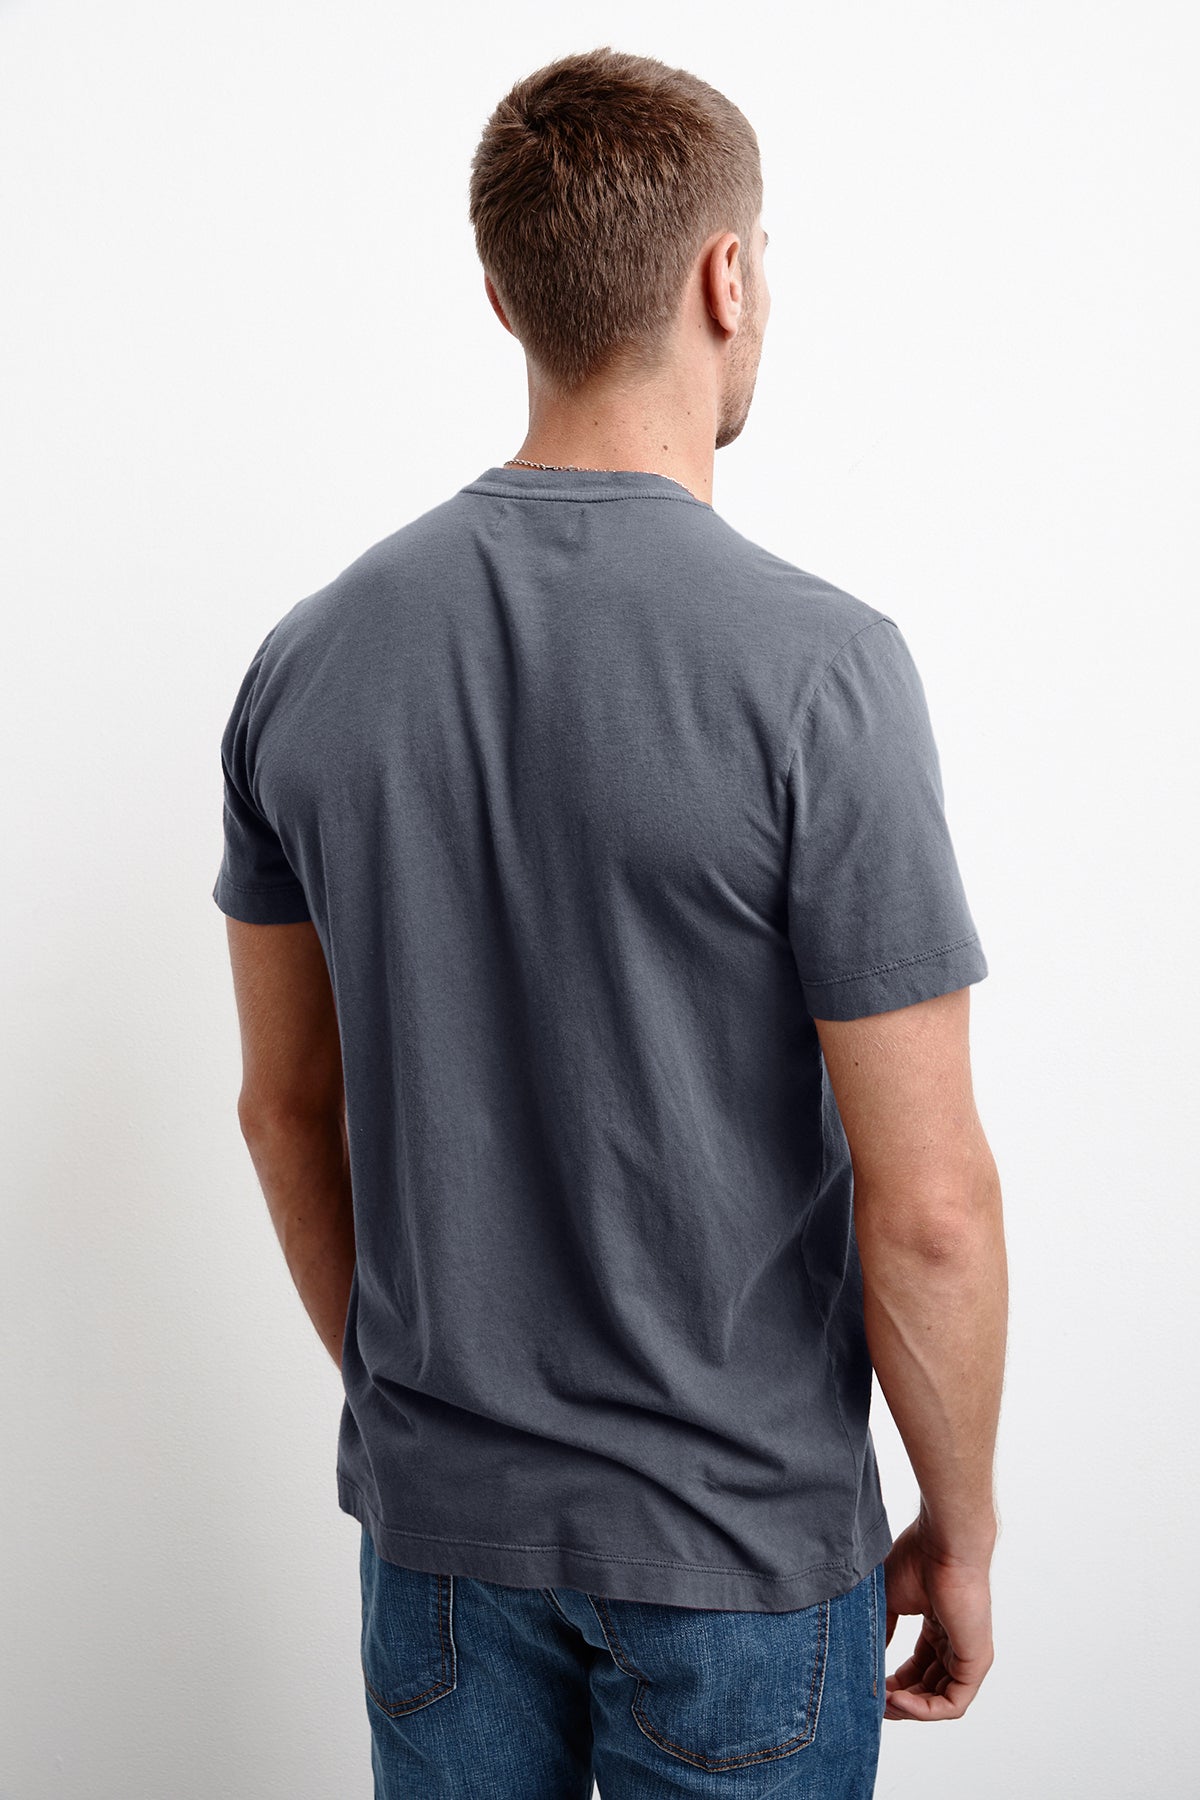 The inimitable back view of a man wearing HOWARD WHISPER CLASSIC CREW NECK TEE jeans and a grey t-shirt from Velvet by Graham & Spencer.-1711198896209